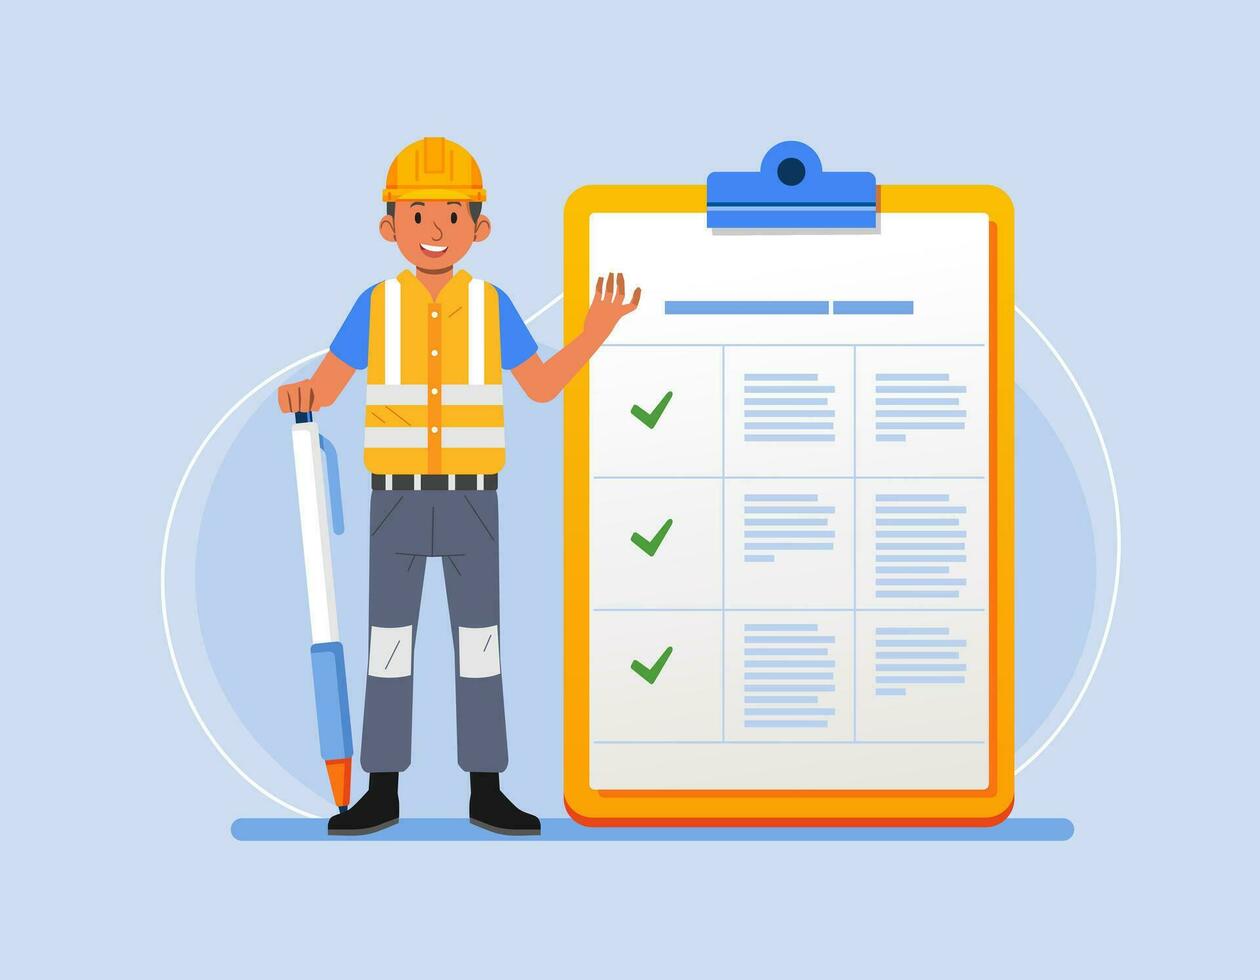 Construction worker with giant pencil near marked checklist on clipboard Successful completion of tasks Flat vector illustration